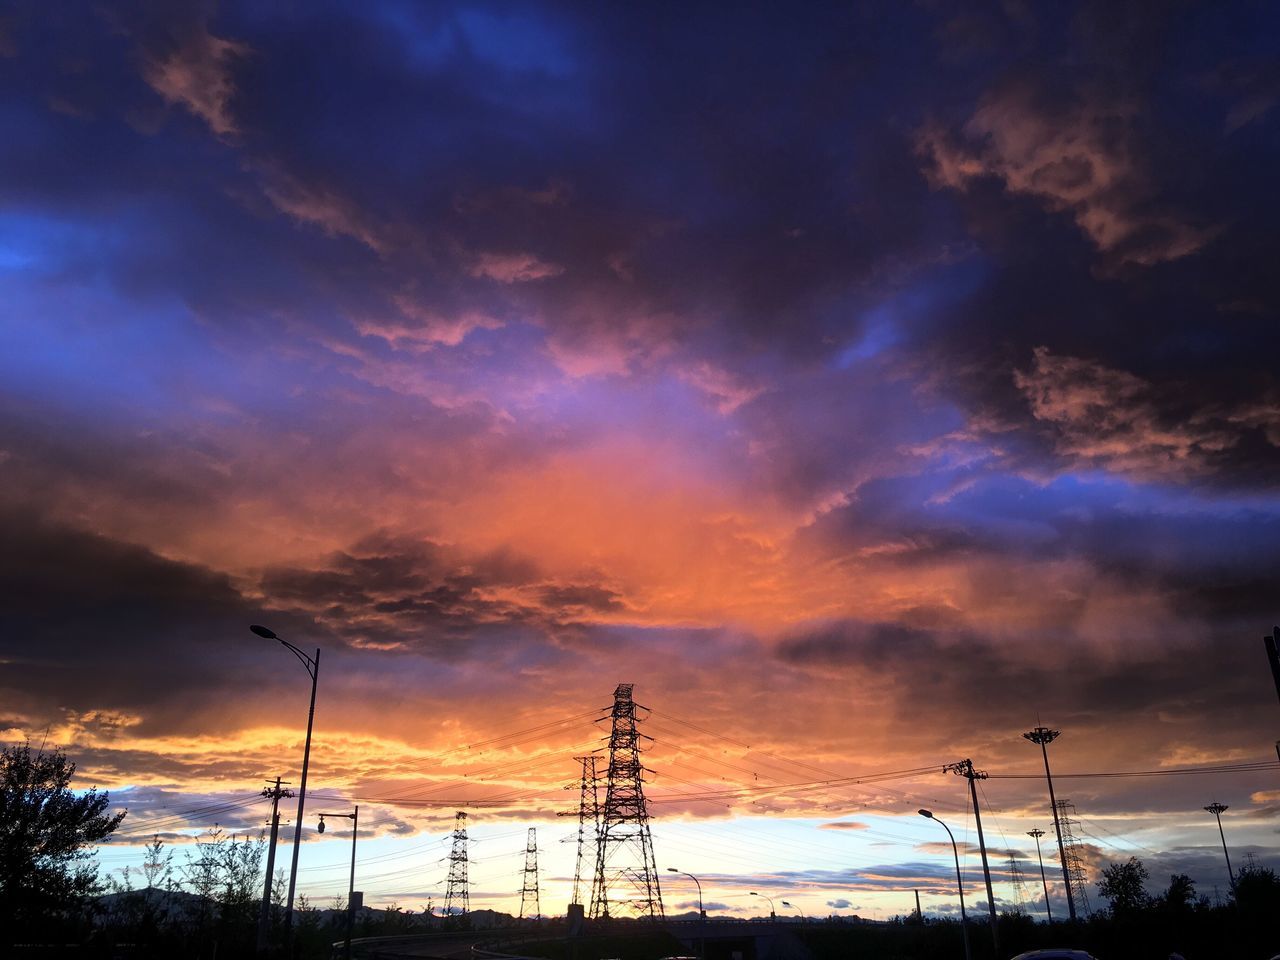 sunset, sky, silhouette, cloud - sky, beauty in nature, tranquility, scenics, orange color, tranquil scene, dramatic sky, nature, cloudy, low angle view, cloud, idyllic, street light, electricity pylon, landscape, dusk, outdoors